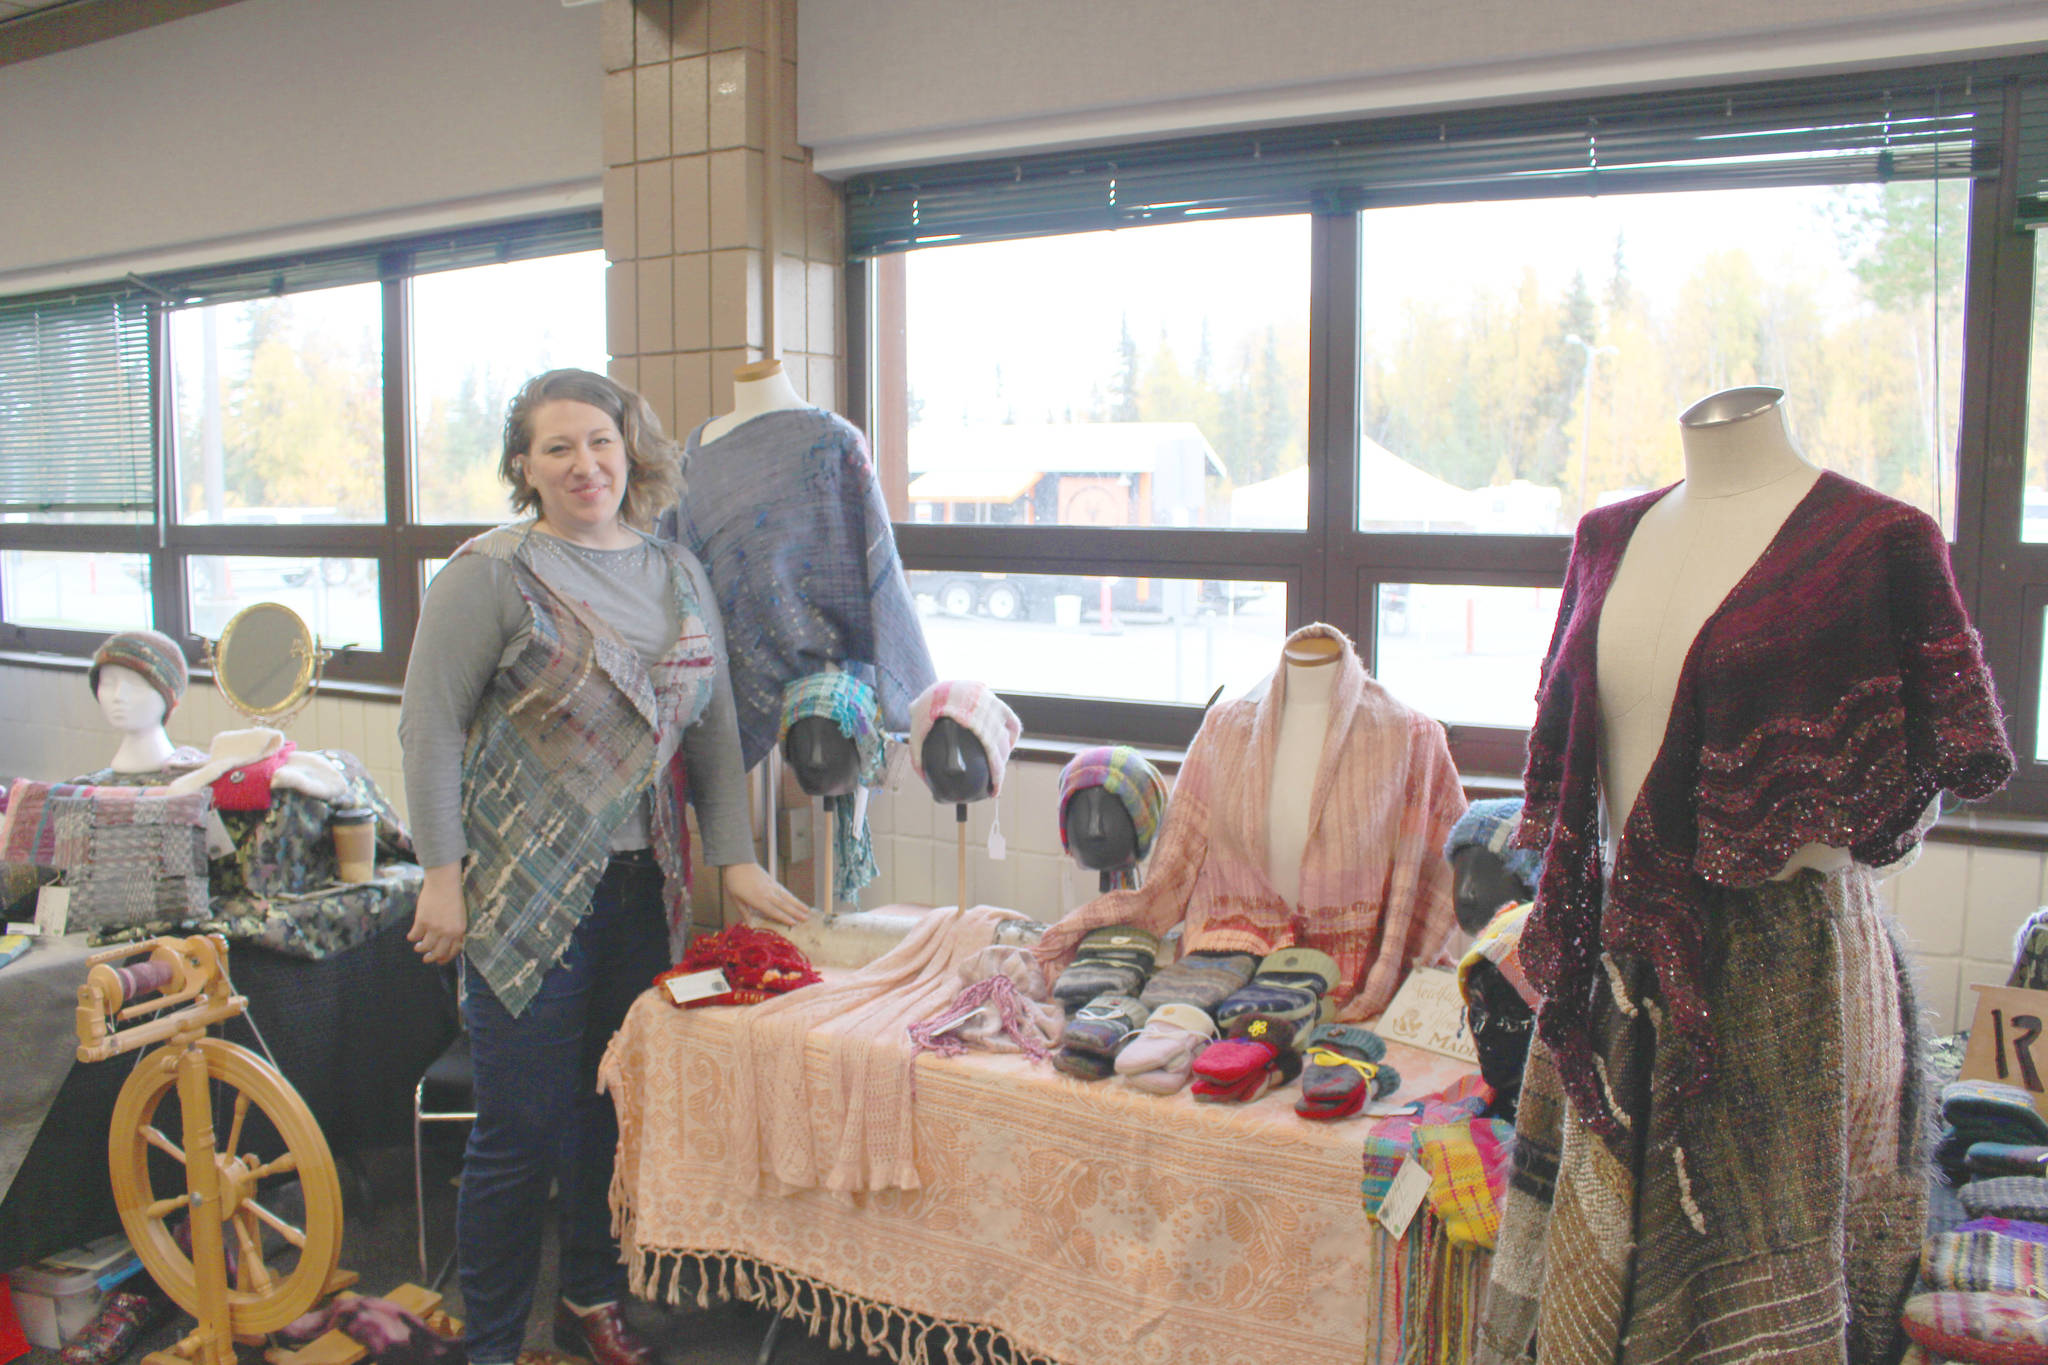 Farrah Weinert shows off some of her wares during the Fireweed FiberFest at the Soldotna Regional Sports Complex on Sept. 28, 2019. (Photo by Brian Mazurek/Peninsula Clarion)